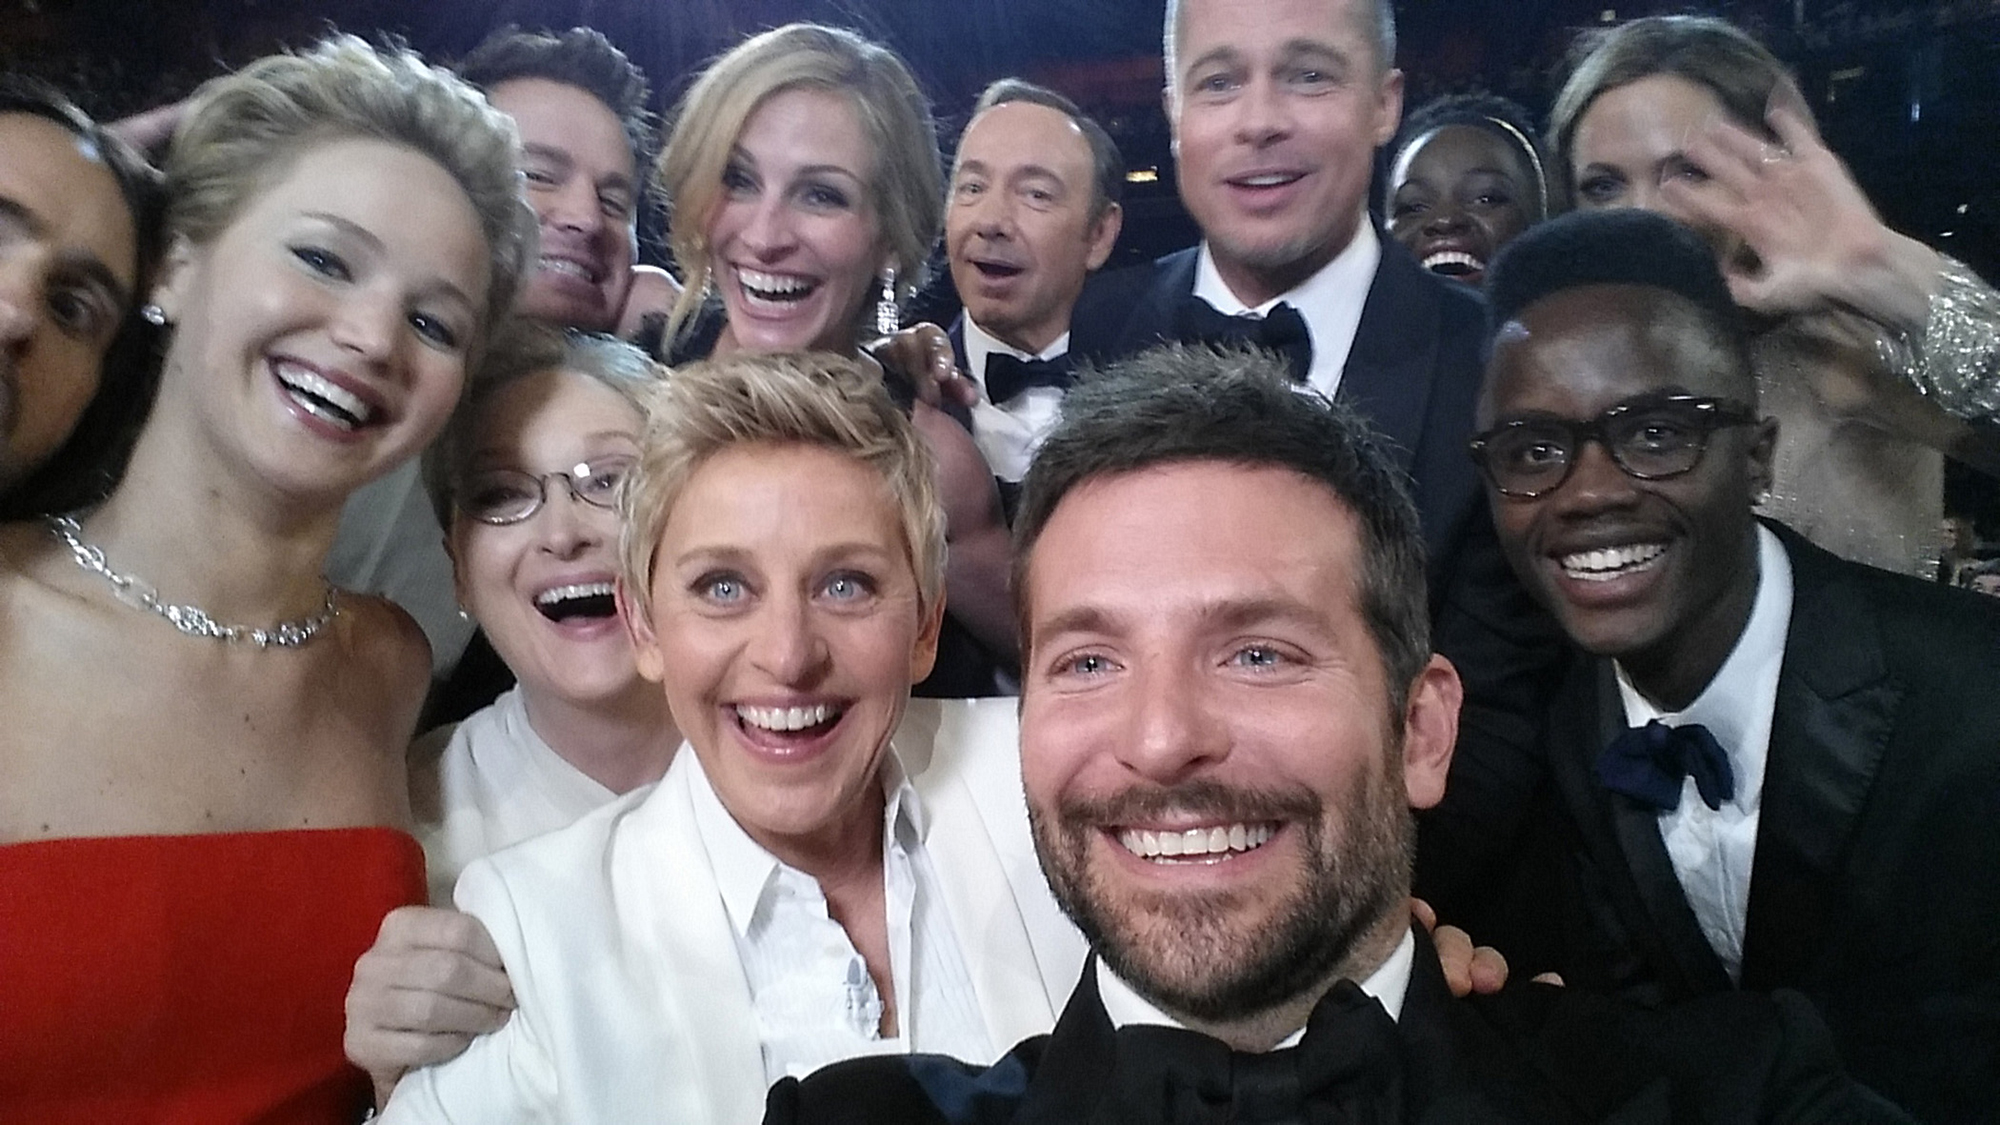 (From left) Jared Leto, Jennifer Lawrence, Channing Tatum, Meryl Streep, Julia Roberts, Kevin Spacey, Brad Pitt, Lupita Nyong'o, Angelina Jolie, Peter Nyong'o Jr. and Bradley Cooper pose for a selfie with Ellen DeGeneres at the 2014 Oscars in Los Angeles. 